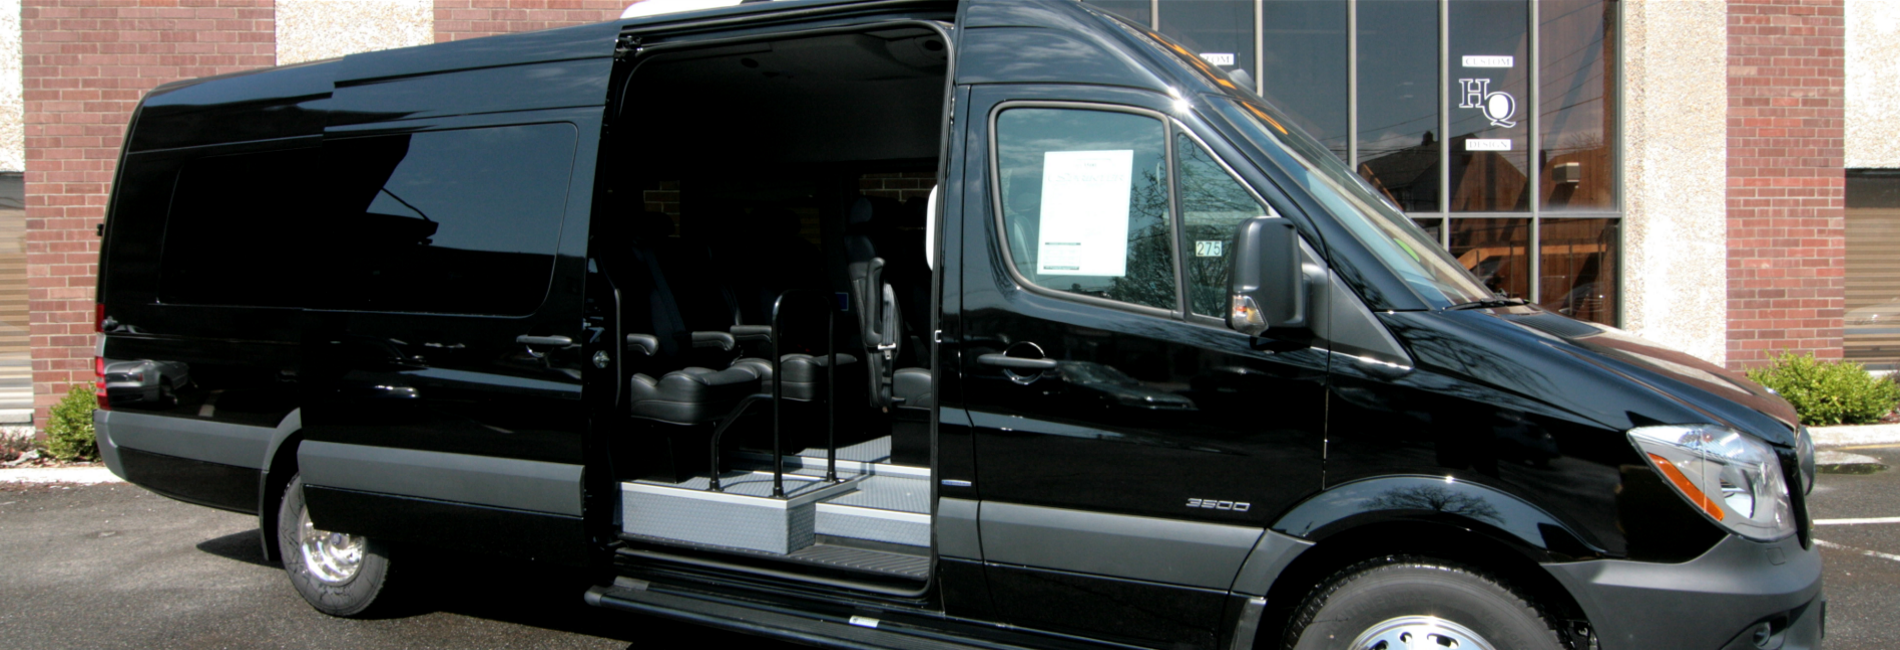 Plug Doors, handicapped lifts, and multiple seating options to fit up to 19 passengers!